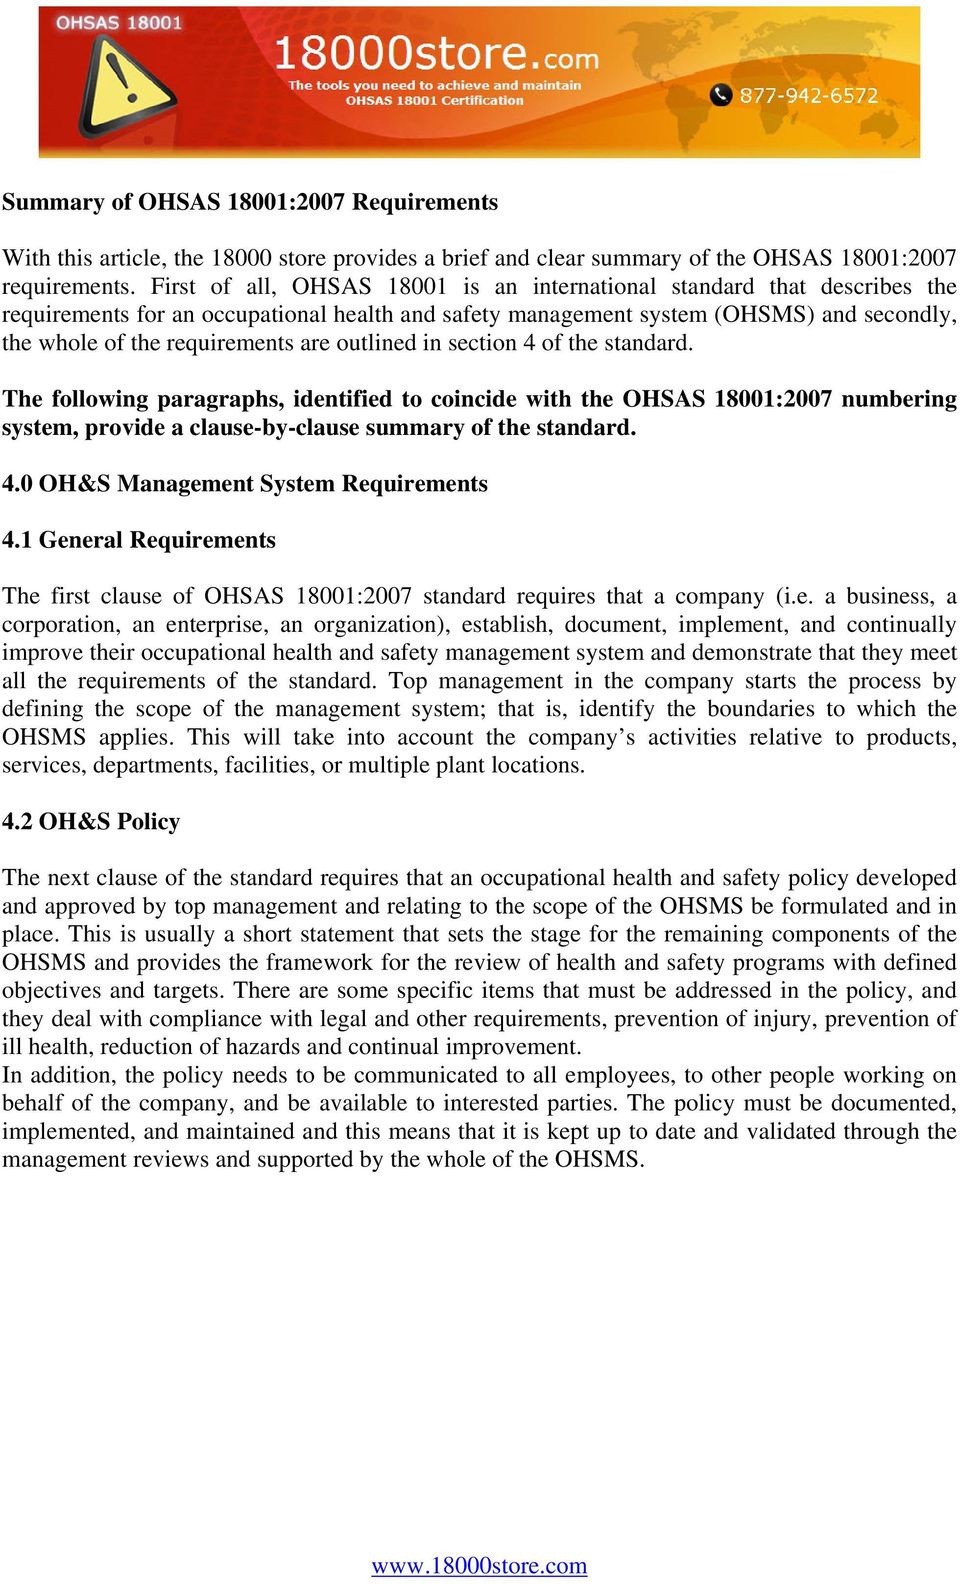 outlined in section 4 of the standard. The following paragraphs, identified to coincide with the OHSAS 18001:2007 numbering system, provide a clause-by-clause summary of the standard. 4.0 OH&S Management System Requirements 4.